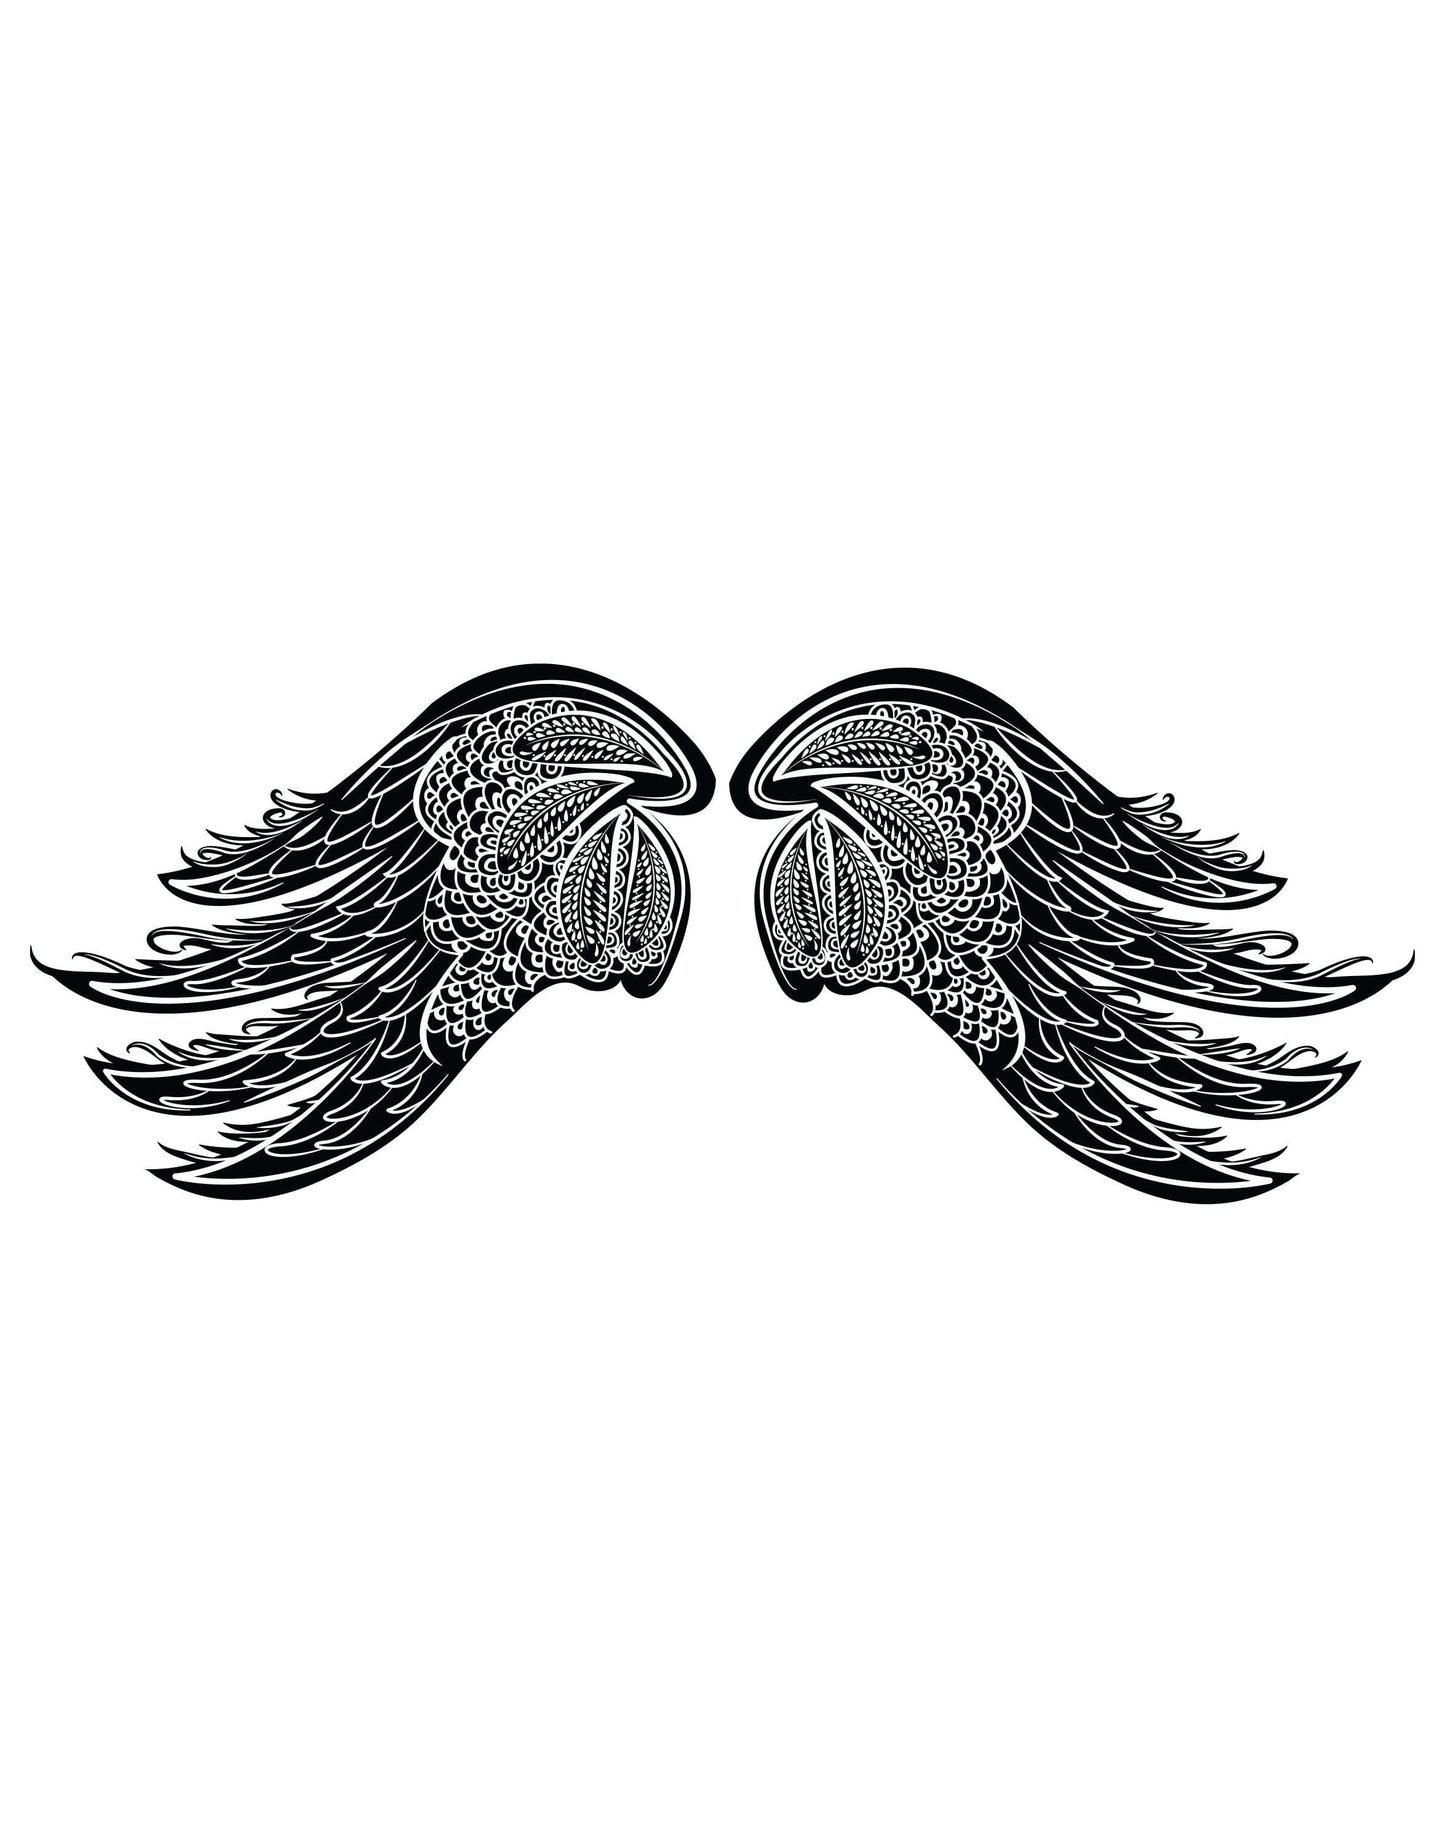 Intricate Wings Vinyl Wall Decal Sticker. #OS_DC231